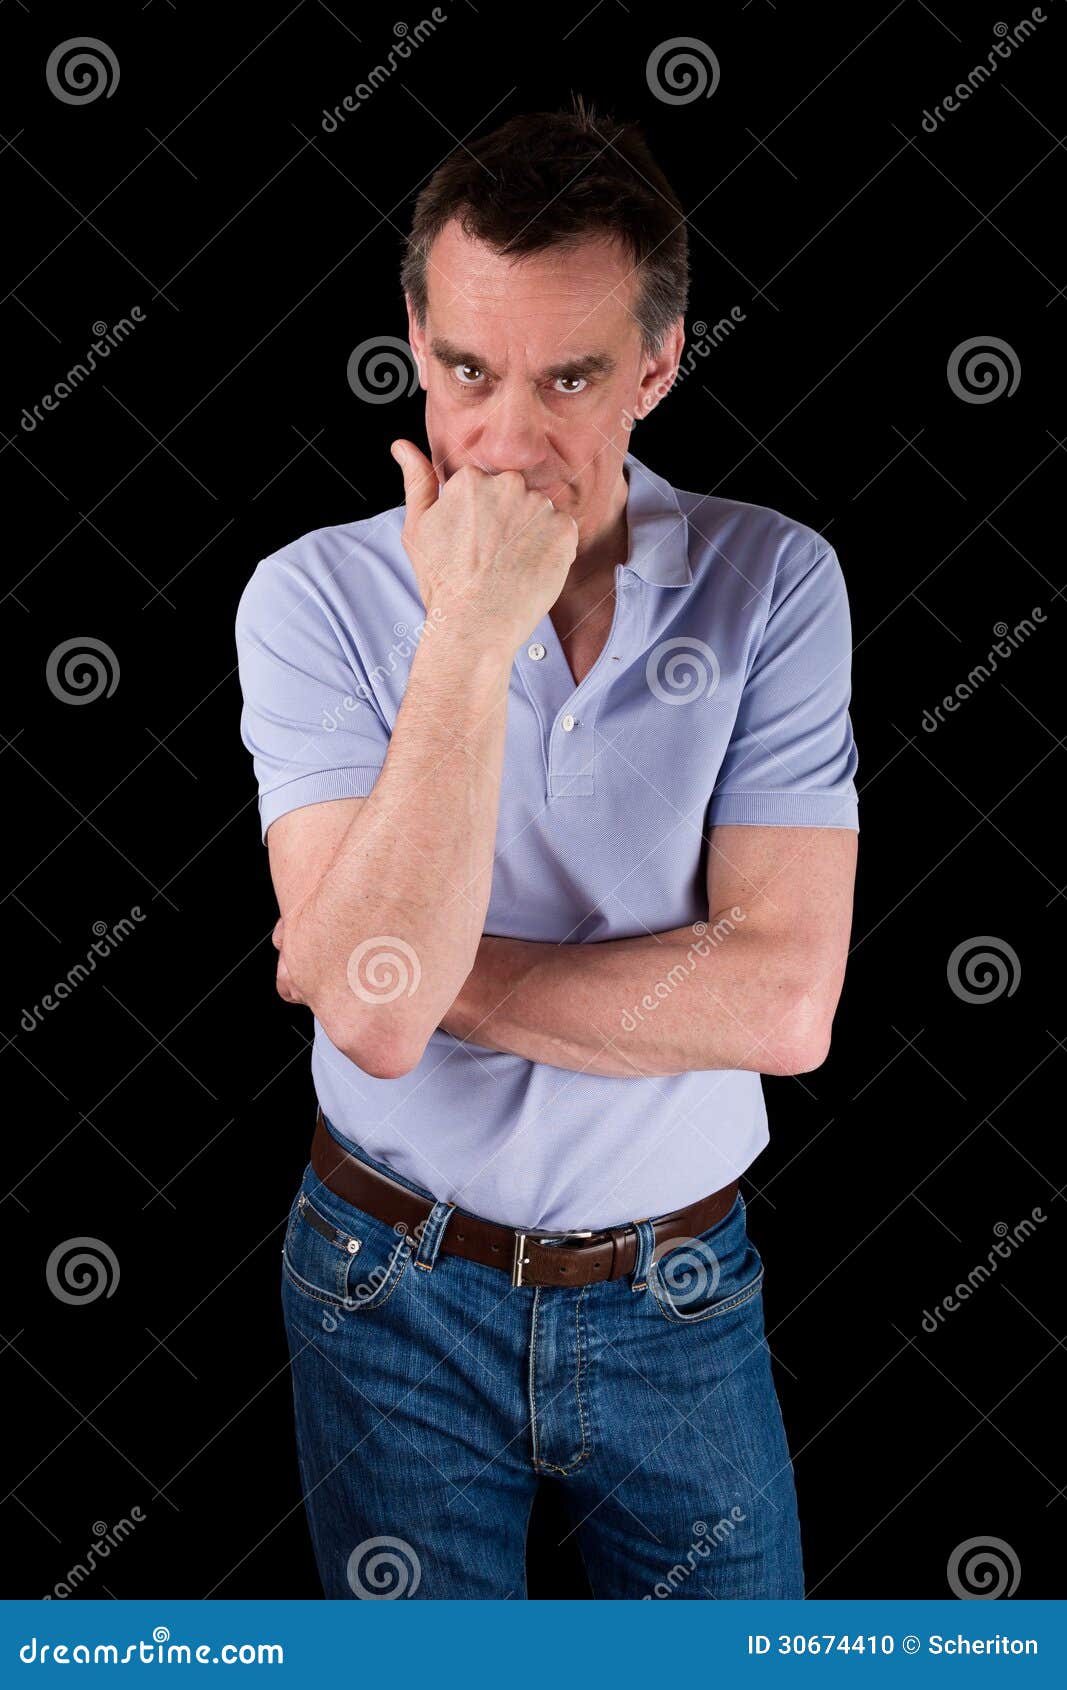 angry frowning man glaring over hand on chin